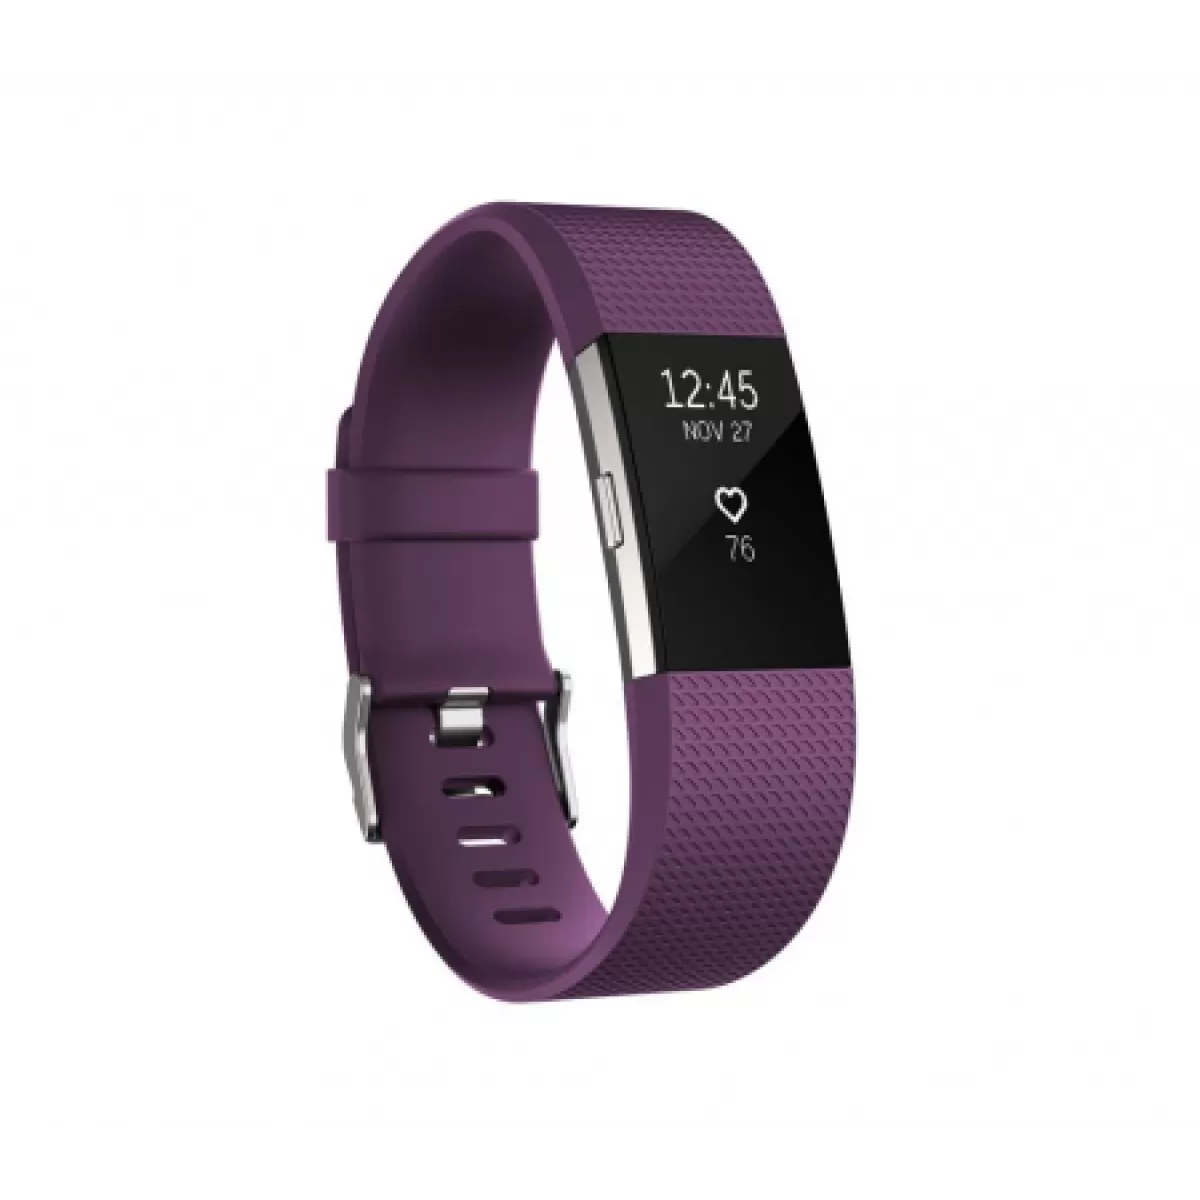 Fitbit Charge 2 Plum Silver Large